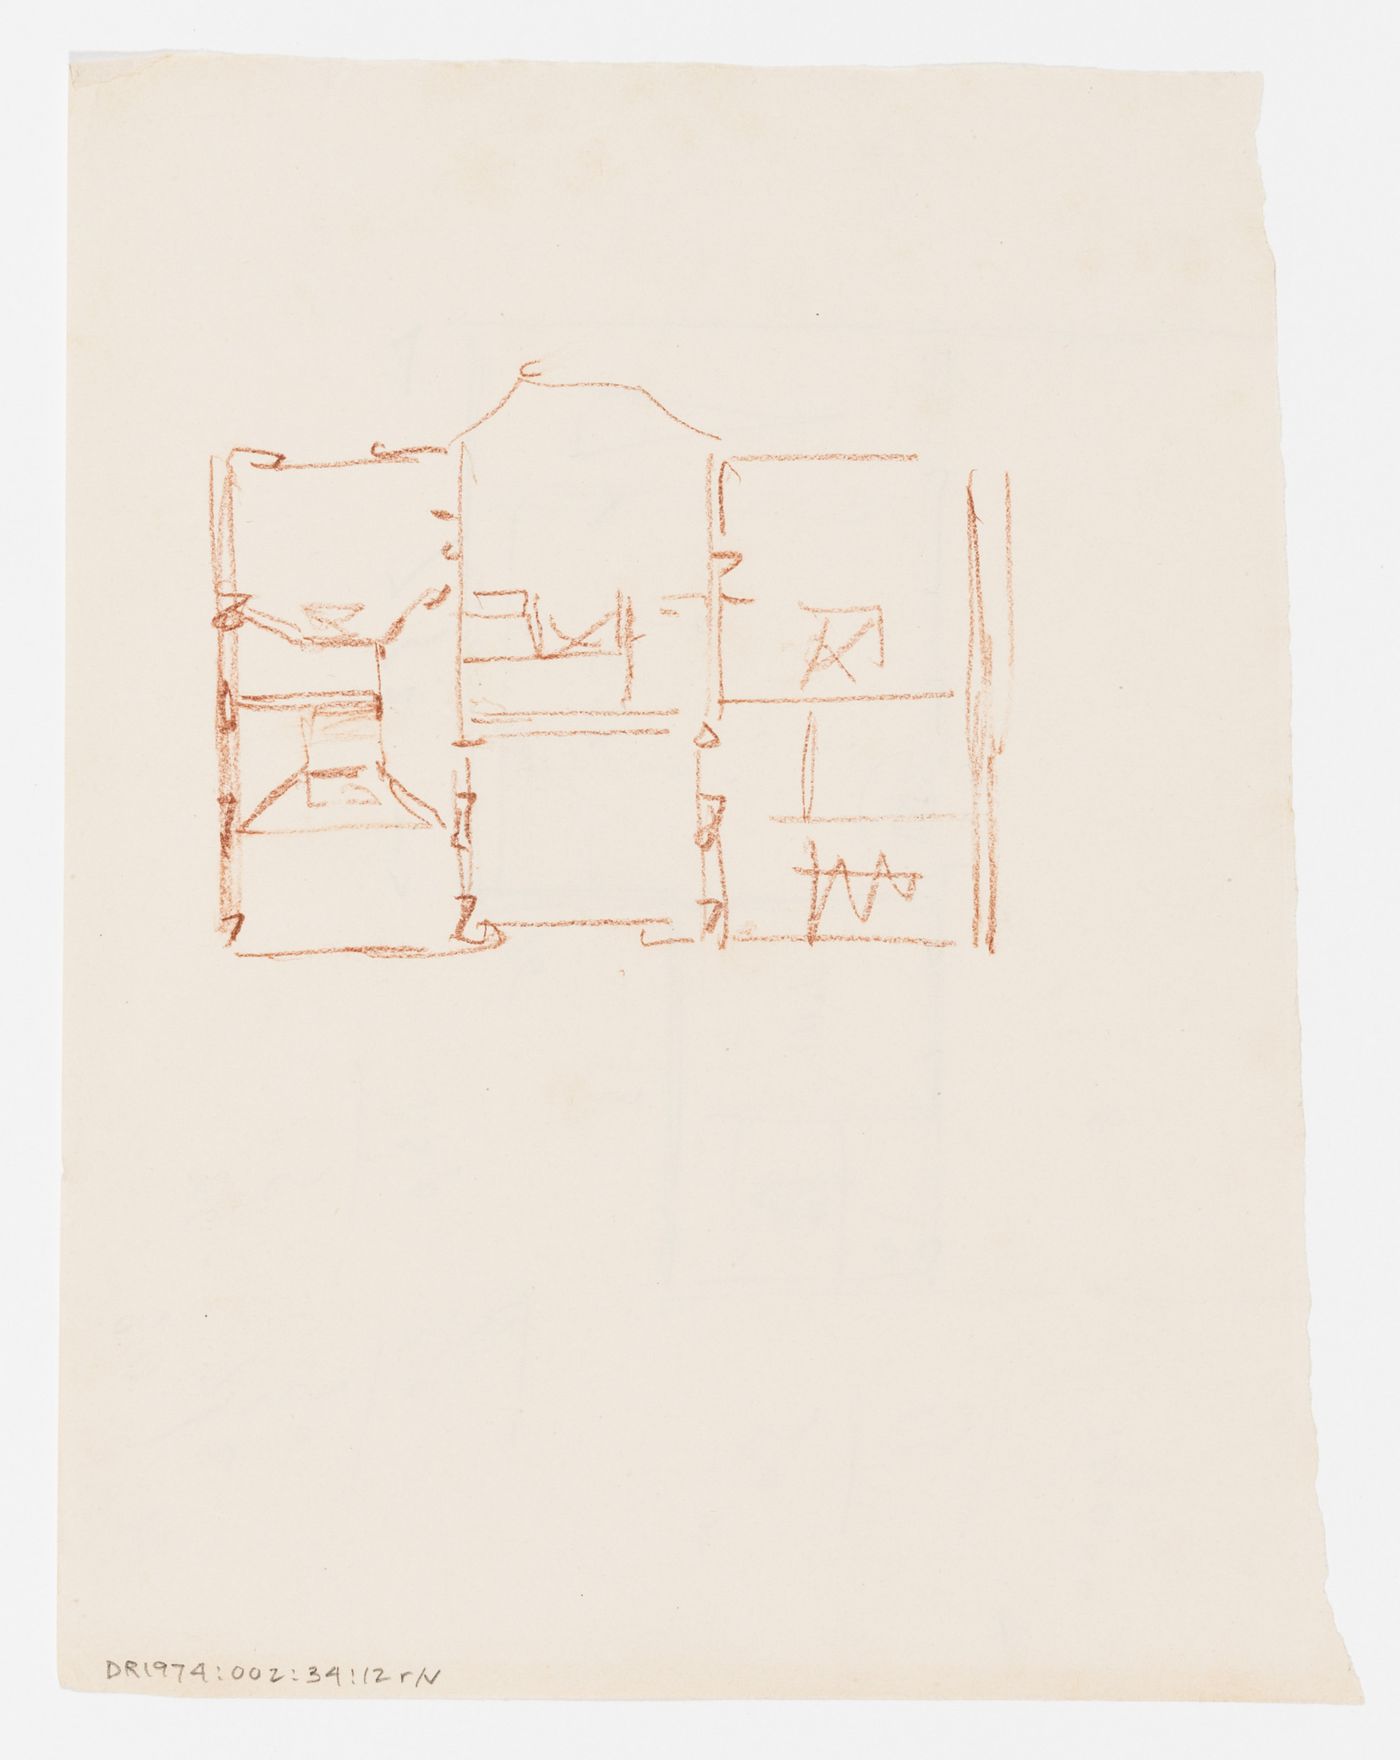 Project no. 2 for a country house for comte Treilhard: Sketch plan, probably for the first floor; verso: Project for a country house for comte Treilhard: Unidentified partial sketch plan